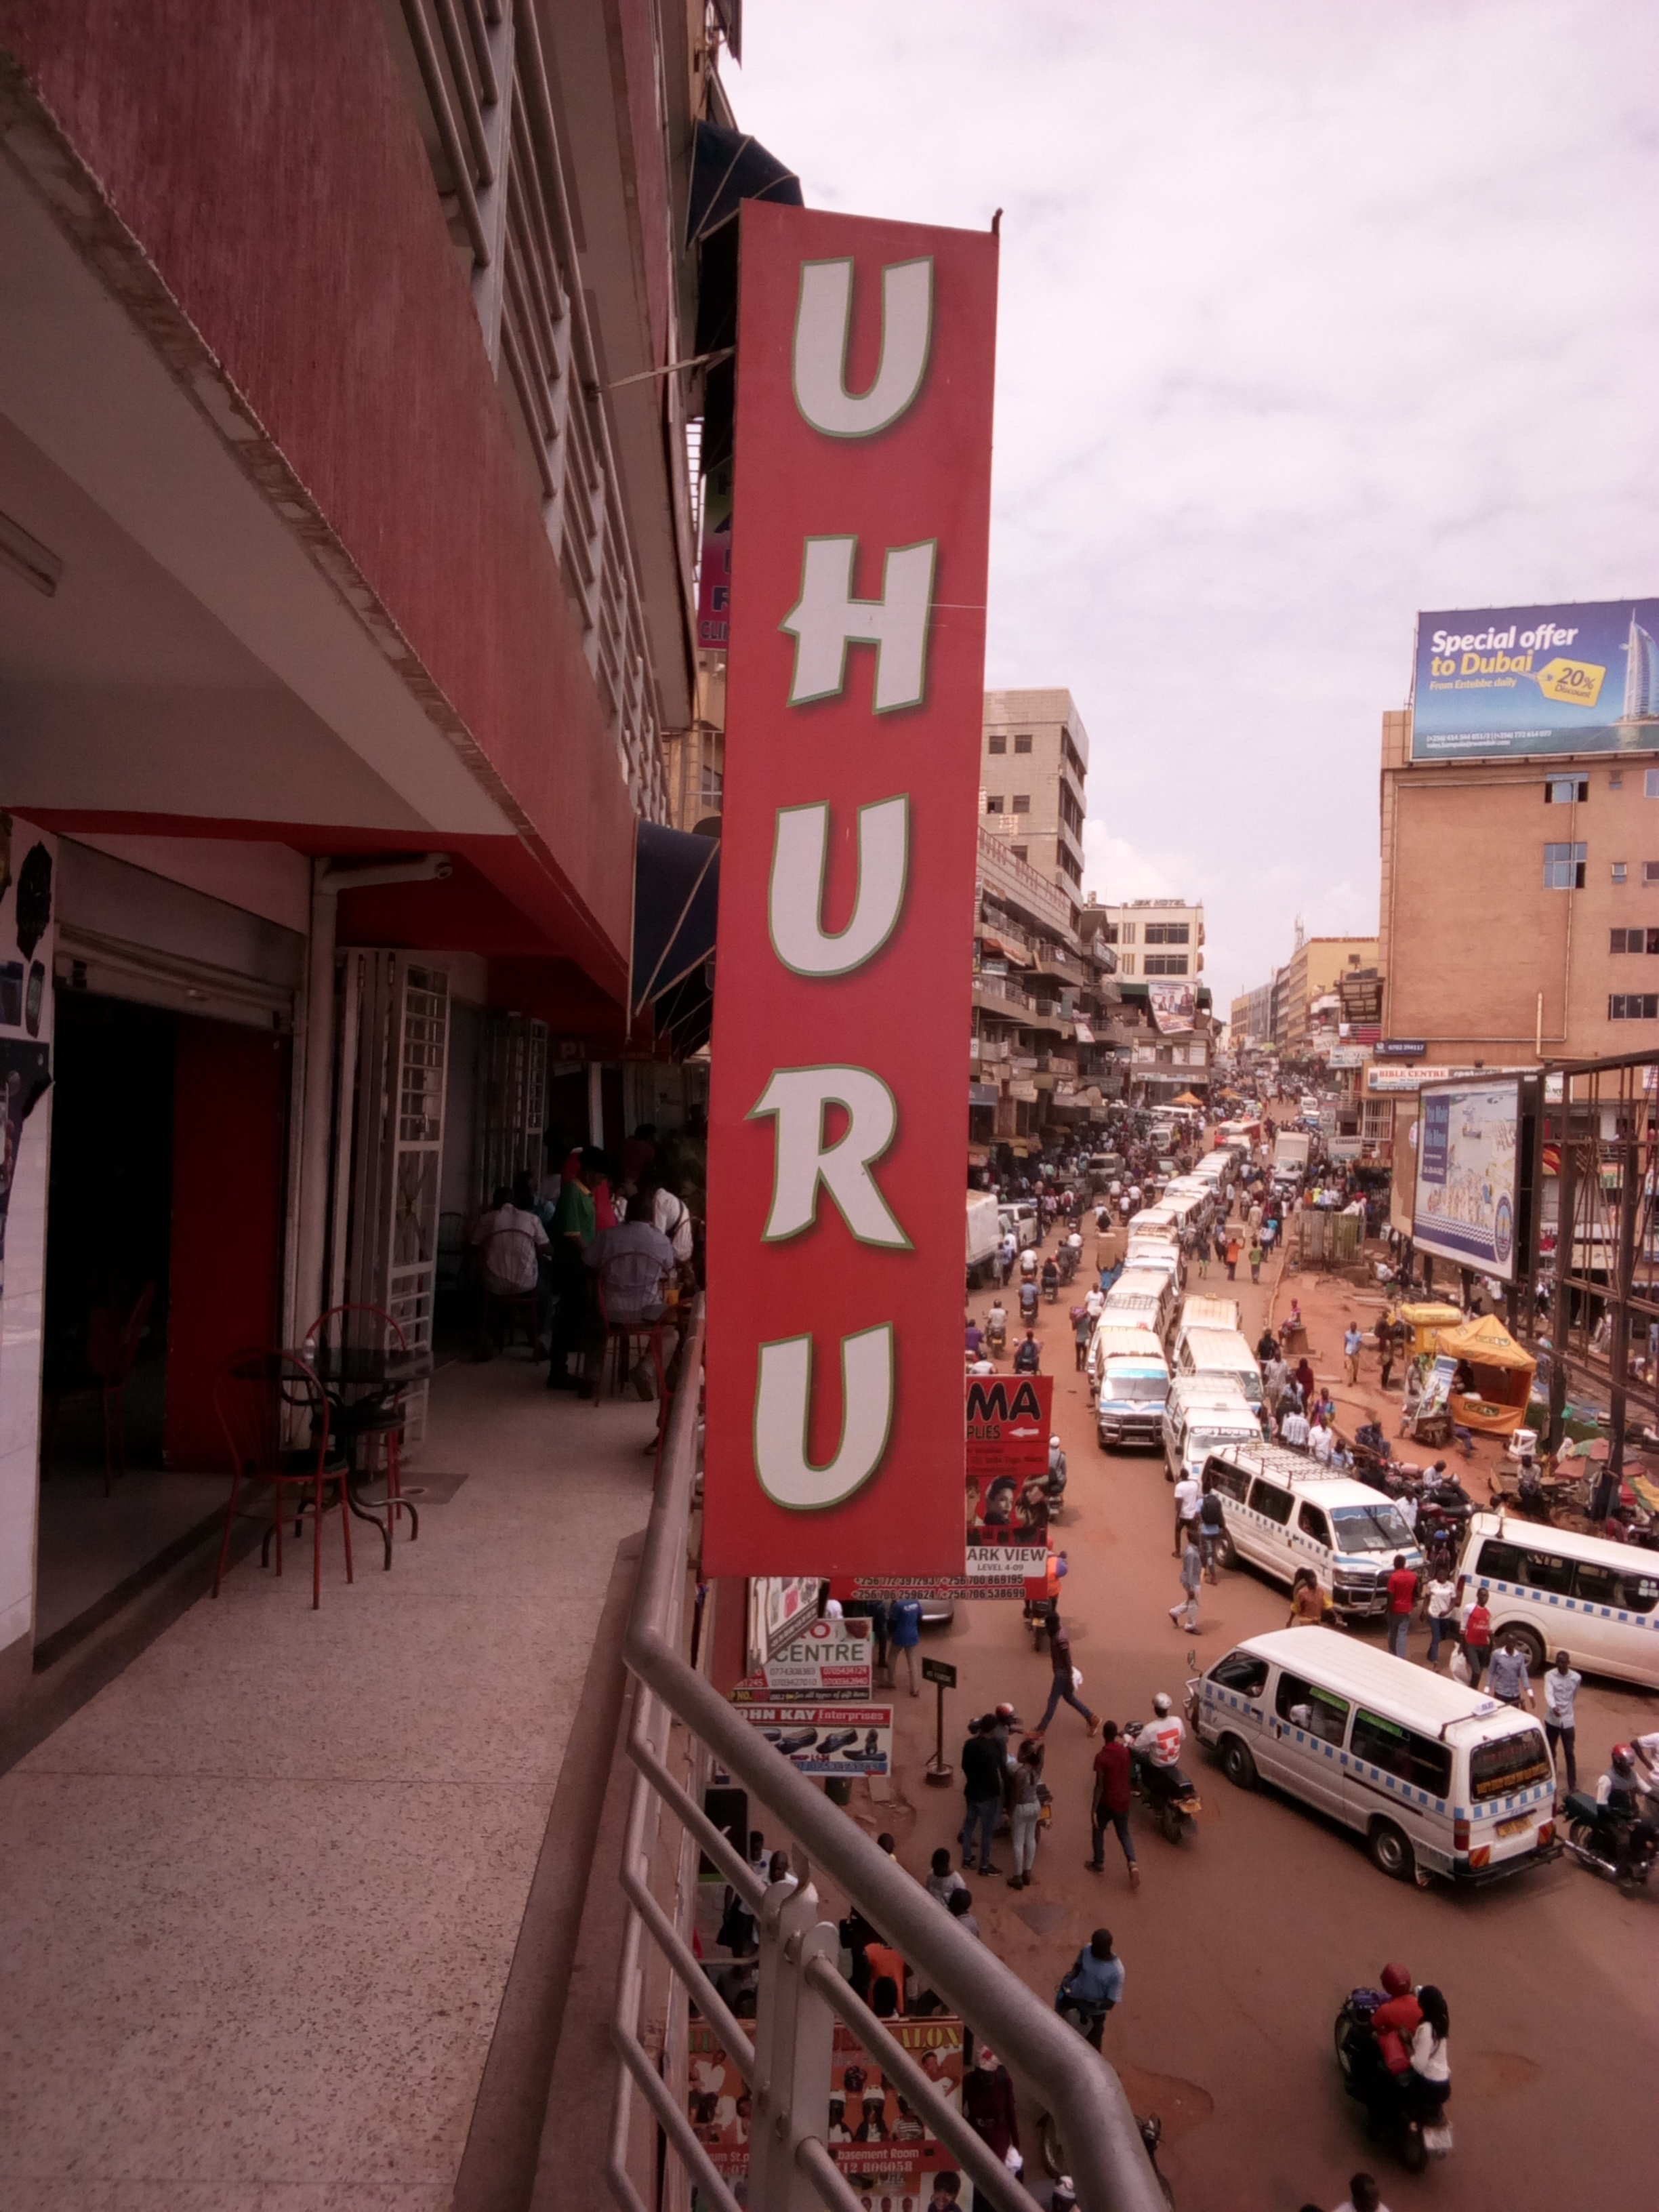 Uhuru opens another fast eatery branch